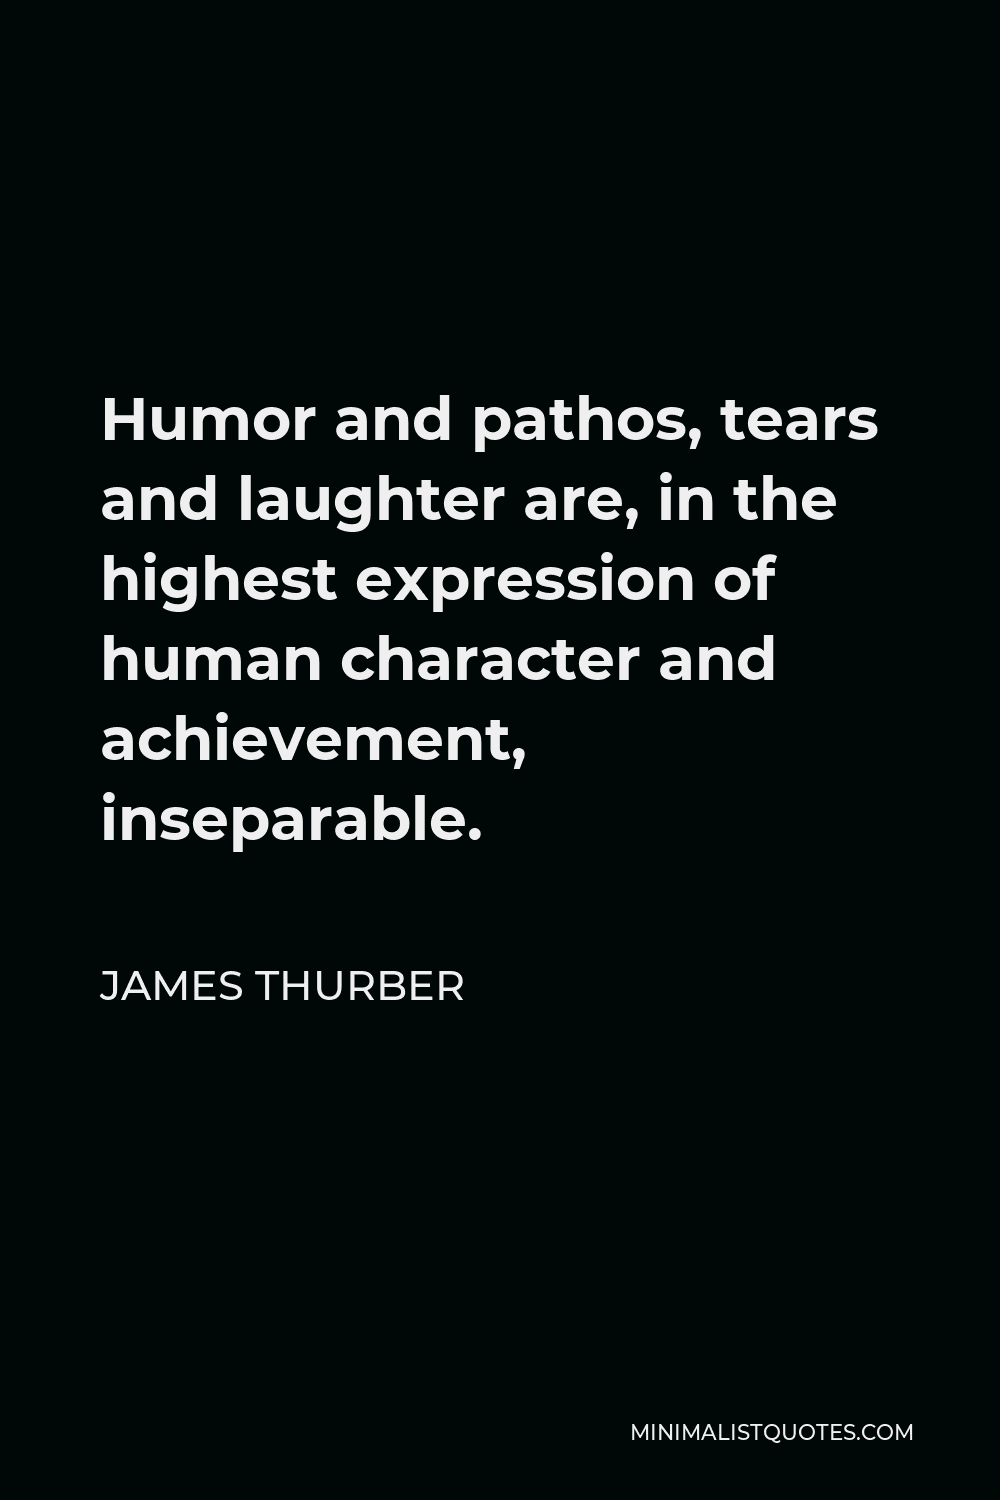 James Thurber Quote - Humor and pathos, tears and laughter are, in the highest expression of human character and achievement, inseparable.